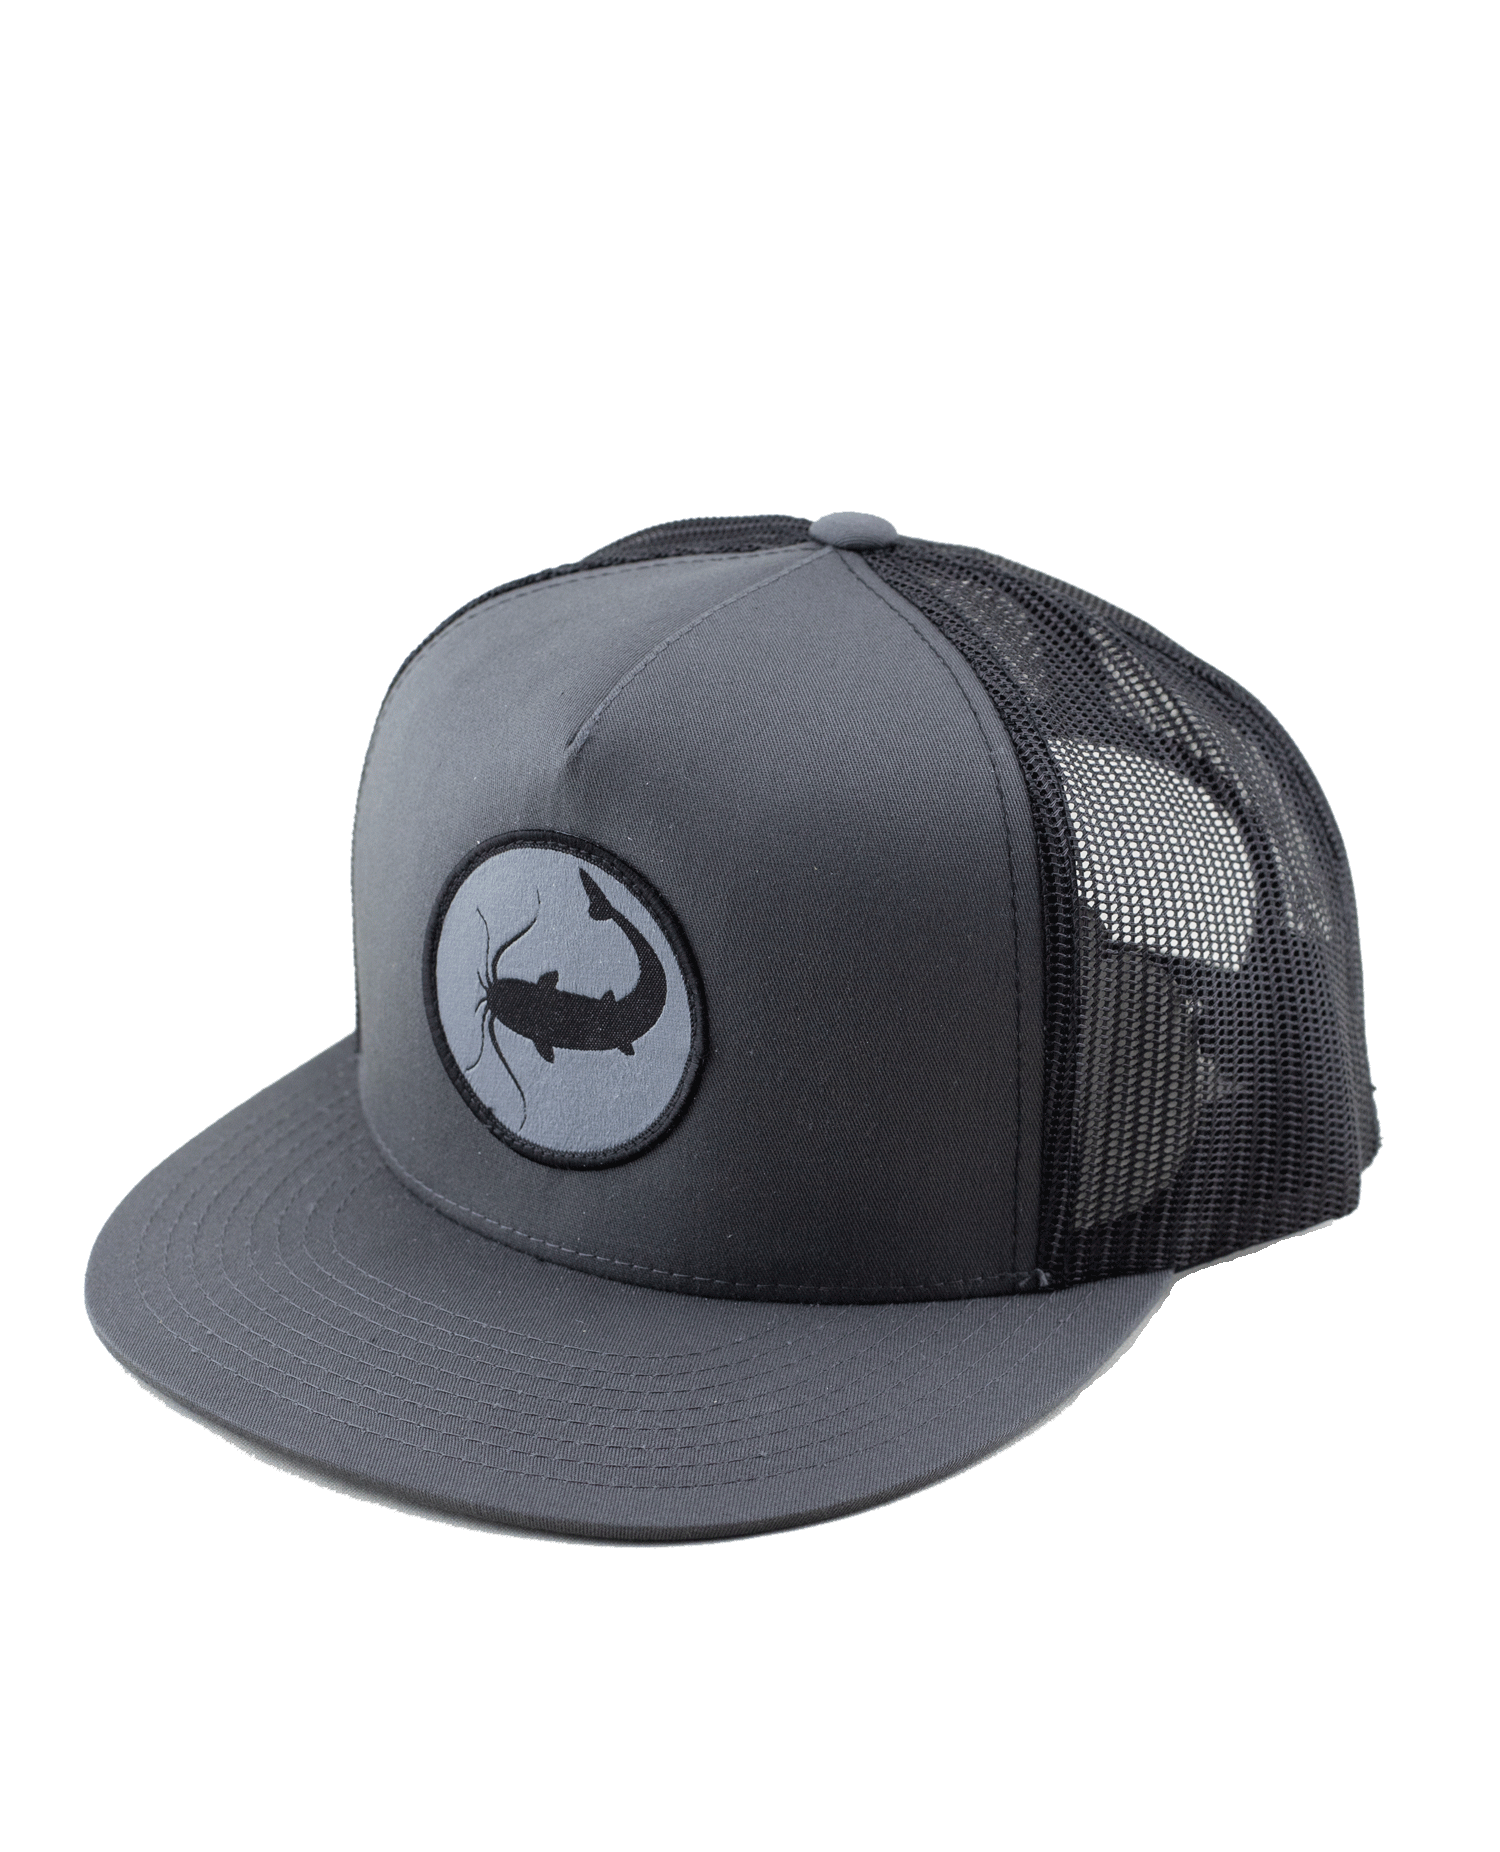 Catfish Patch Hat - 2-Tone Charcoal - 4 Trucker